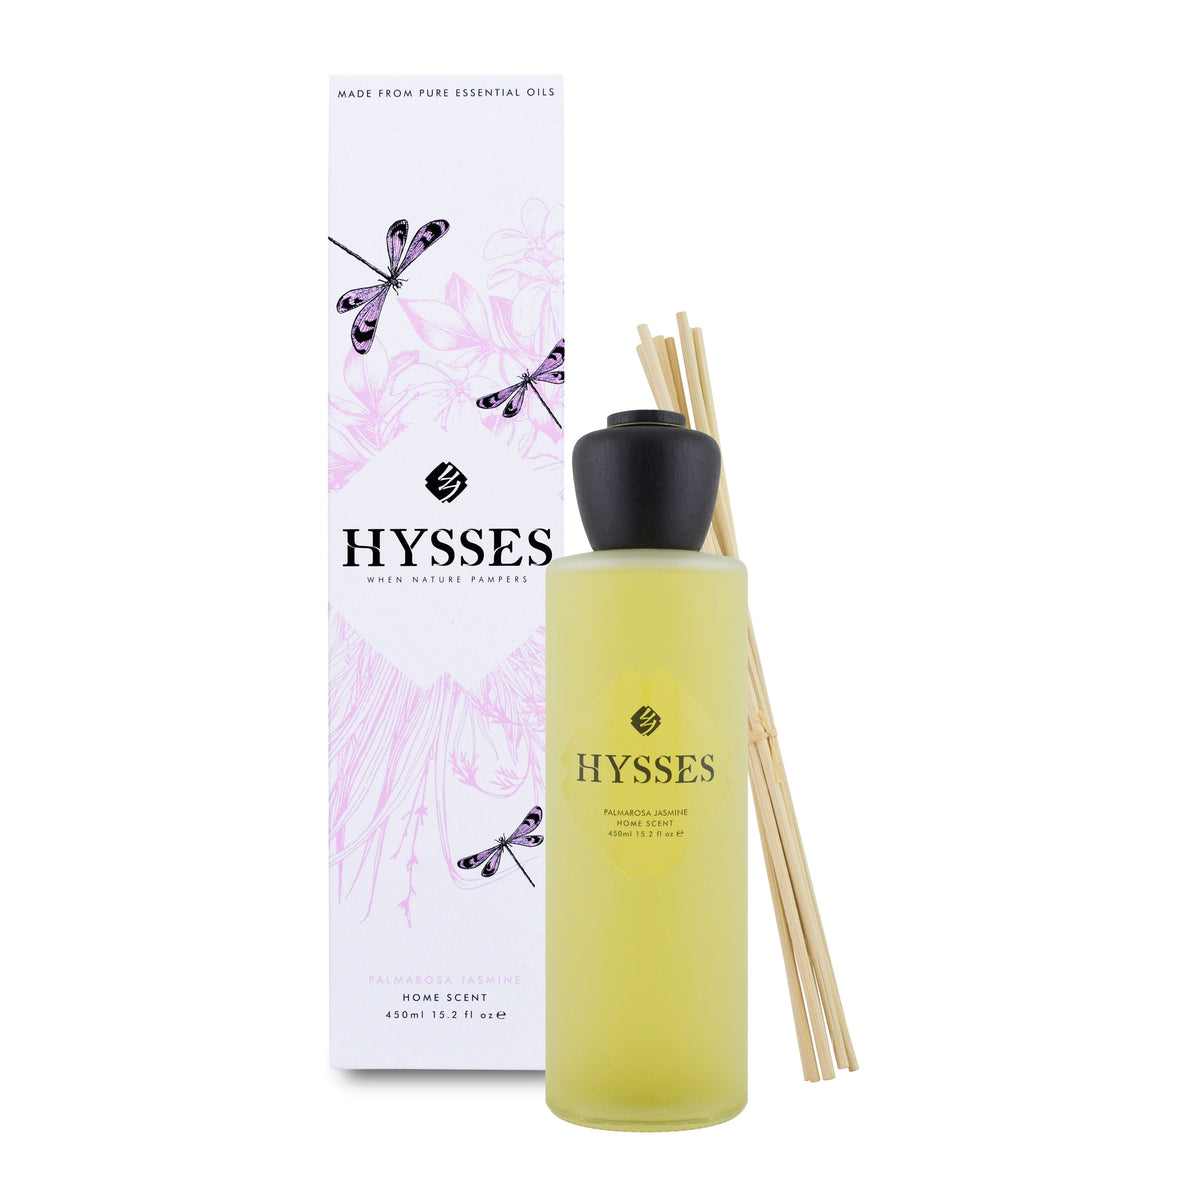 Hysses Home Scents 450ml Home Scent Reed Diffuser Palmarosa Jasmine